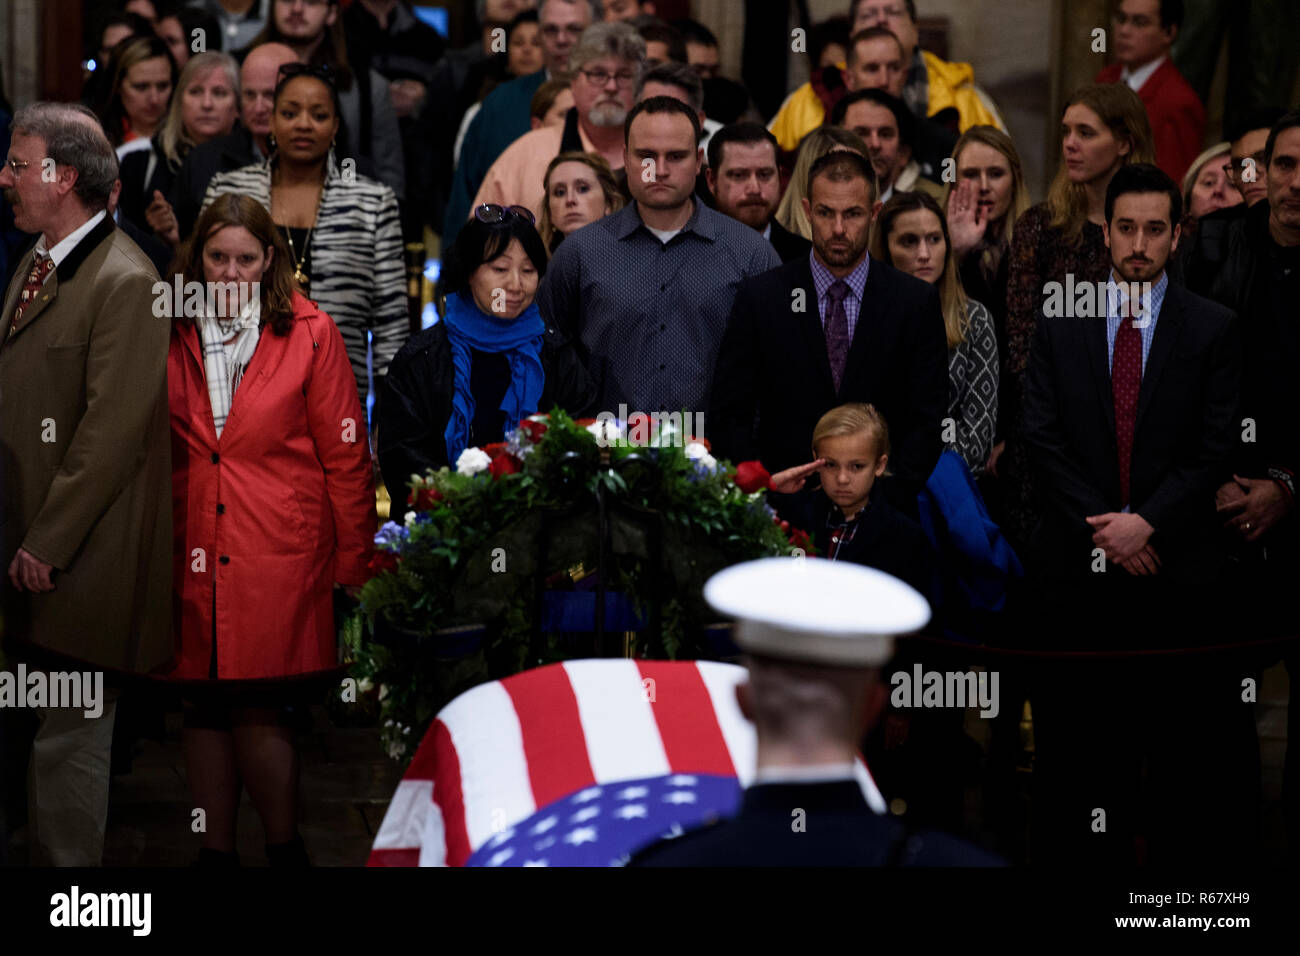 Washington, DC. 3rd Dec, 2018. Stephen G. Leighton Jr. salutes while paying respects with his father Stephen G. Leighton Sr. as the remains of former US President George H. W. Bush lie in state in the US Capitol's rotunda December 3, 2018 in Washington, DC. | usage worldwide Credit: dpa/Alamy Live News Stock Photo